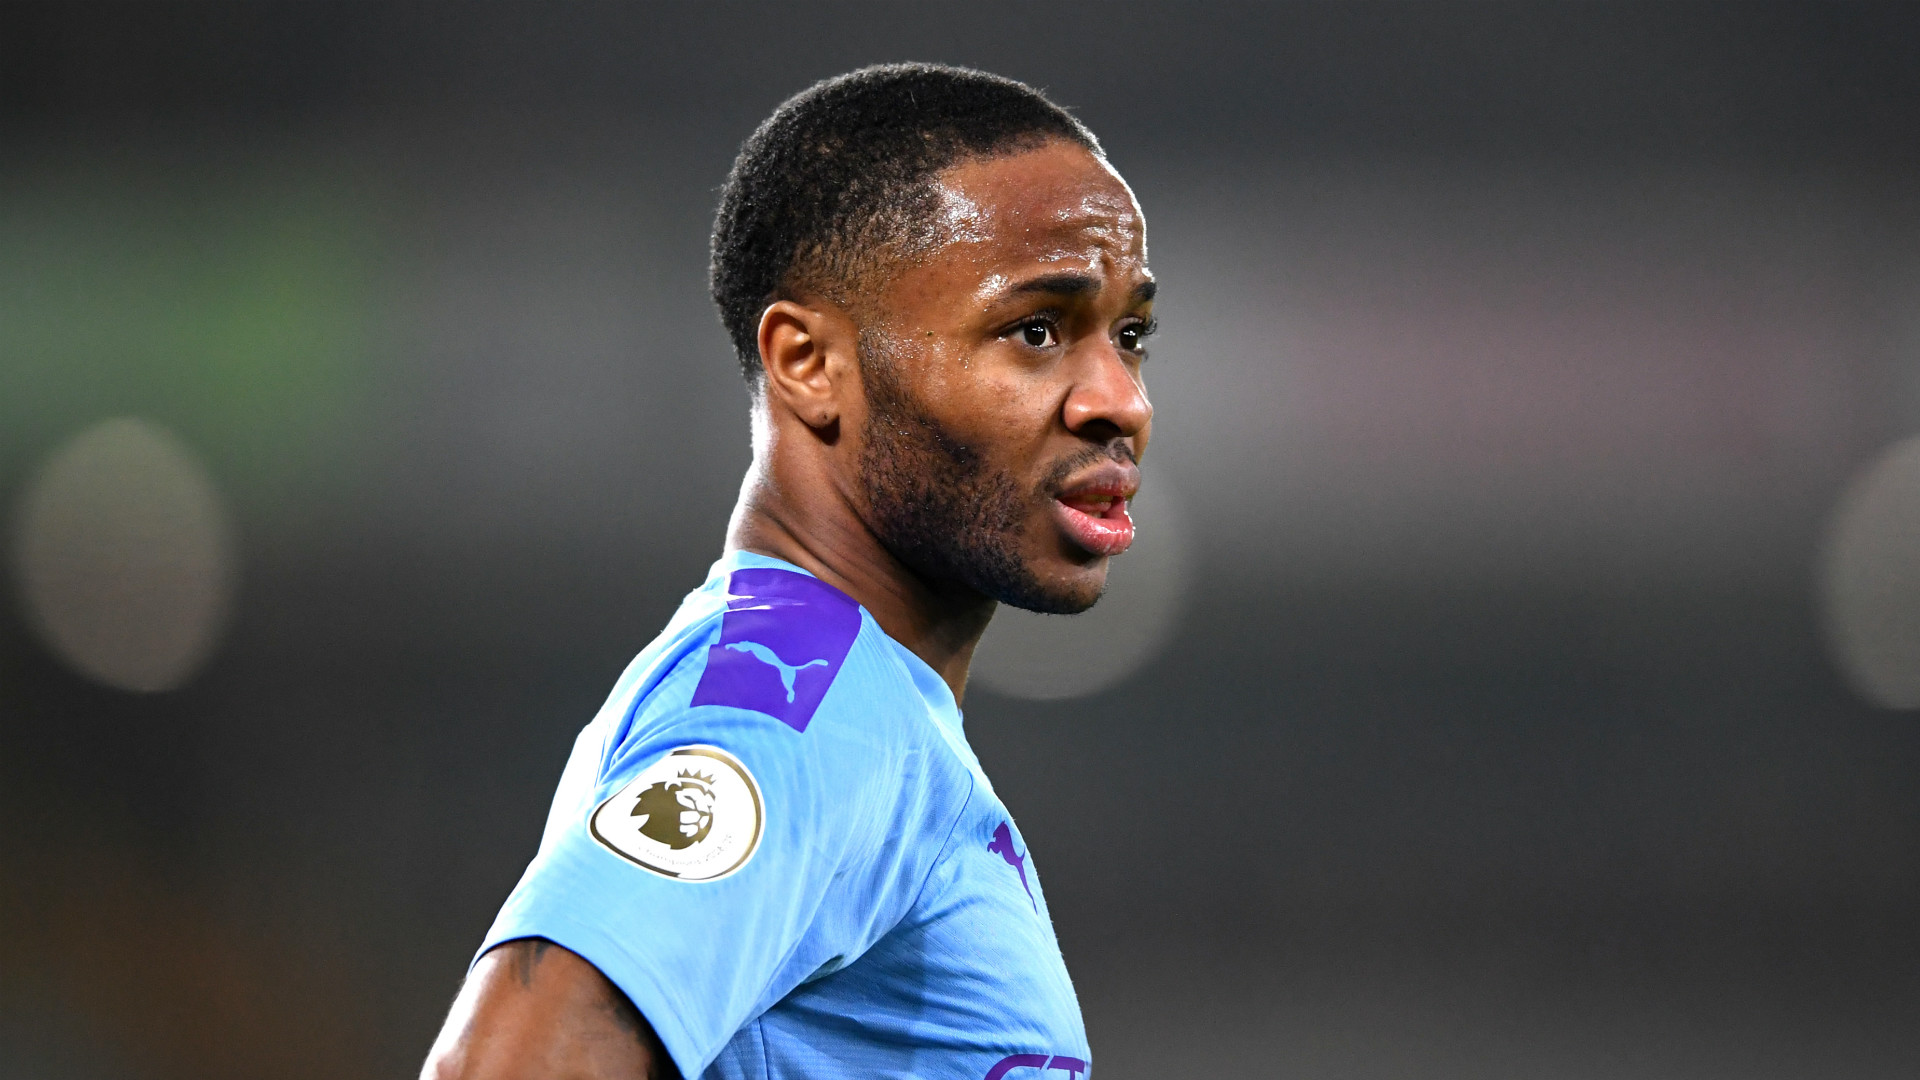 Manchester City star Sterling in talks over ambassador role to combat racism